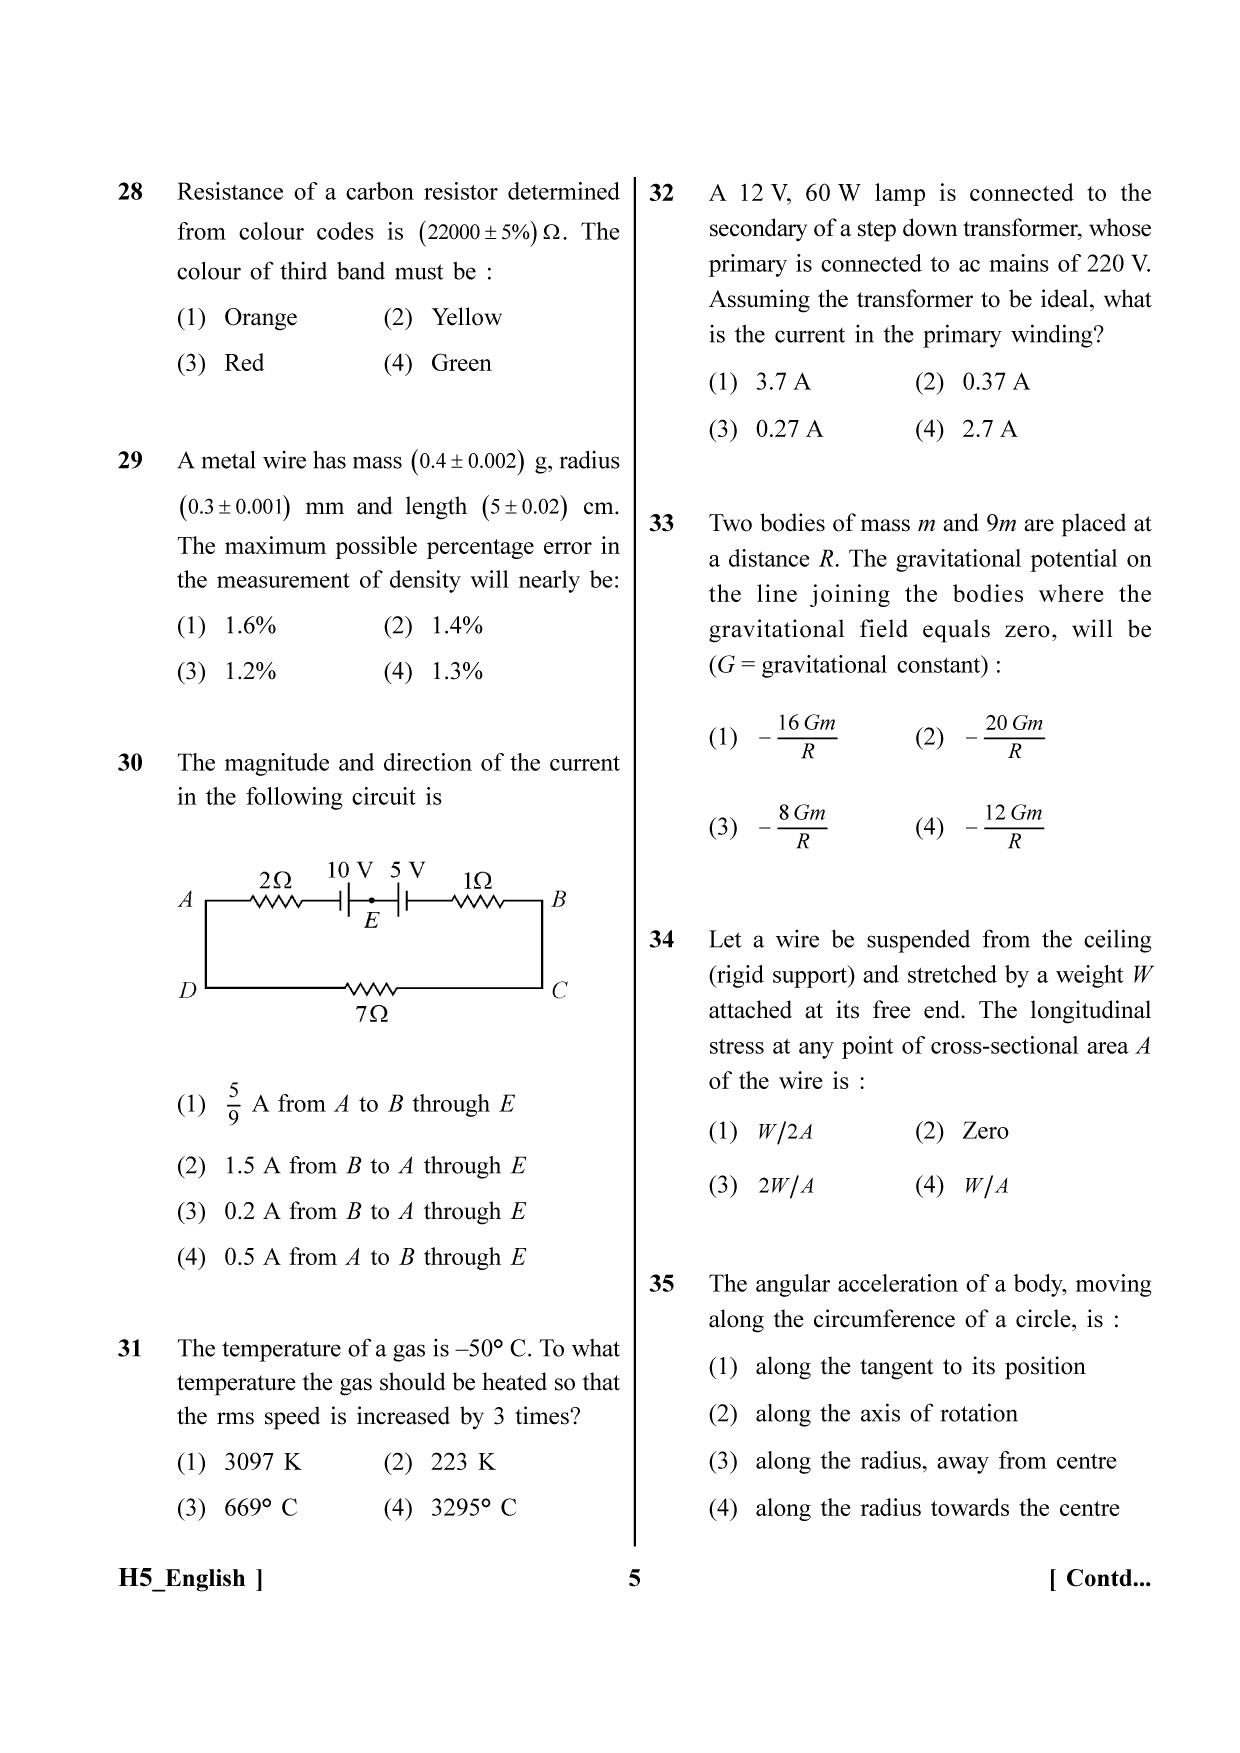 NEET 2023 H5 Question Paper - Page 5